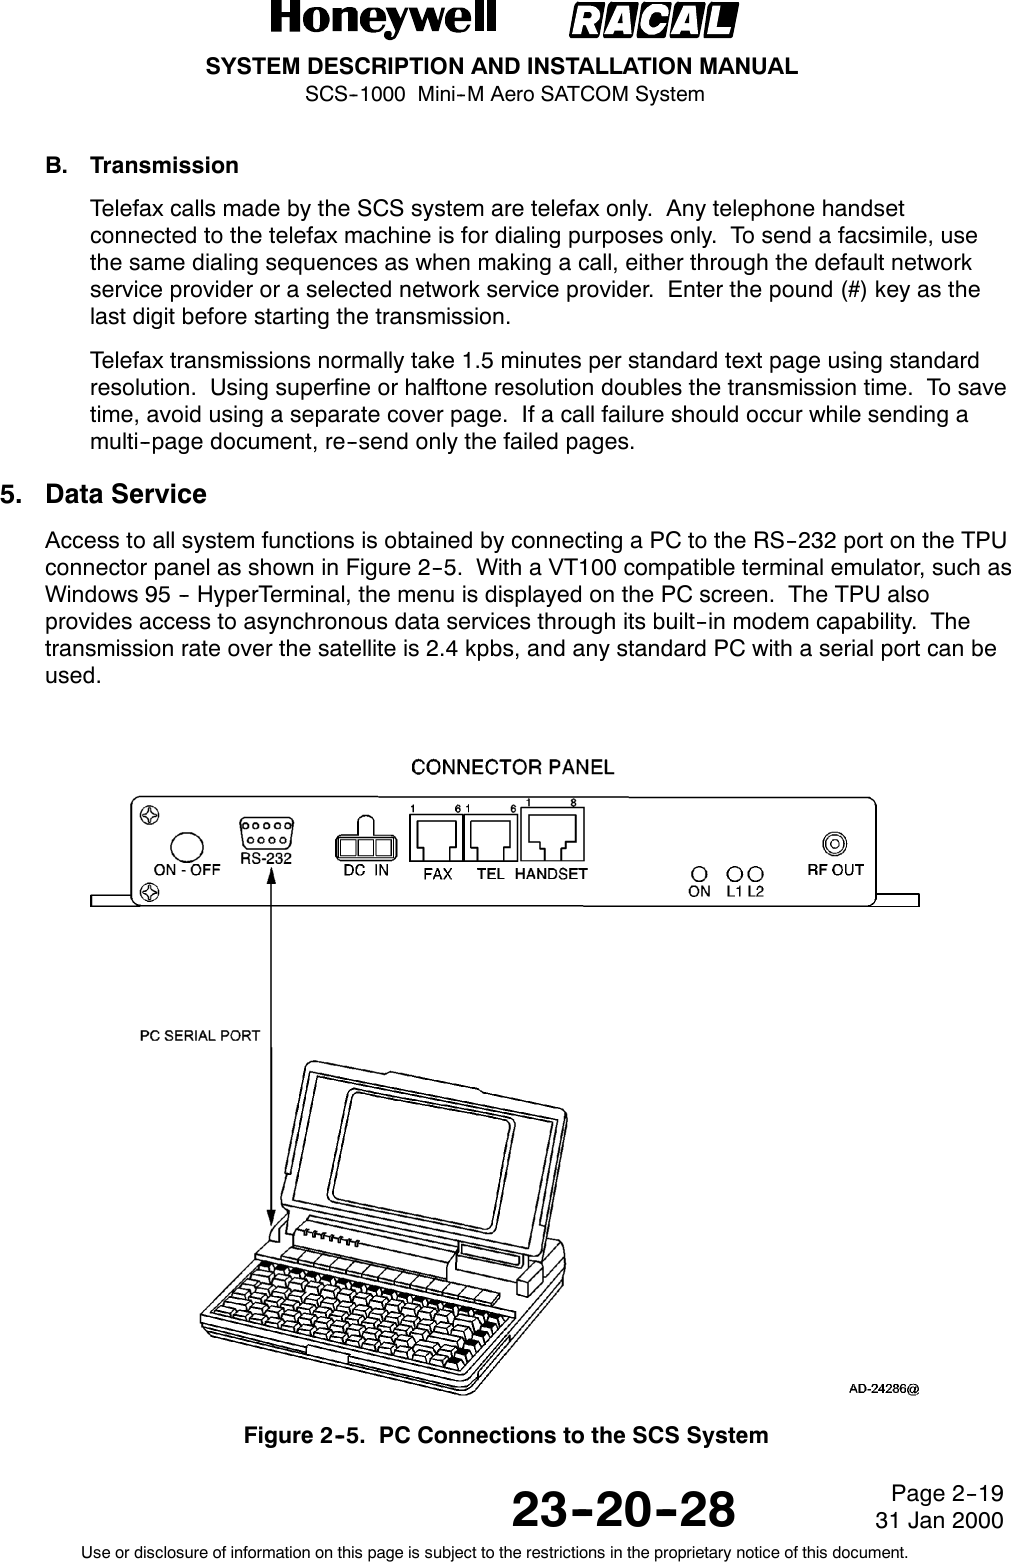 SYSTEM DESCRIPTION AND INSTALLATION MANUALSCS--1000 Mini--M Aero SATCOM System23--20--28Use or disclosure of information on this page is subject to the restrictions in the proprietary notice of this document.Page 2--1931 Jan 2000B. TransmissionTelefax calls made by the SCS system are telefax only. Any telephone handsetconnected to the telefax machine is for dialing purposes only. To send a facsimile, usethe same dialing sequences as when making a call, either through the default networkservice provider or a selected network service provider. Enter the pound (#) key as thelast digit before starting the transmission.Telefax transmissions normally take 1.5 minutes per standard text page using standardresolution. Using superfine or halftone resolution doubles the transmission time. To savetime, avoid using a separate cover page. If a call failure should occur while sending amulti--page document, re--send only the failed pages.5. Data ServiceAccess to all system functions is obtained by connecting a PC to the RS--232 port on the TPUconnector panel as shown in Figure 2--5. With a VT100 compatible terminal emulator, such asWindows 95 -- HyperTerminal, the menu is displayed on the PC screen. The TPU alsoprovides access to asynchronous data services through its built--in modem capability. Thetransmission rate over the satellite is 2.4 kpbs, and any standard PC with a serial port can beused.Figure 2--5. PC Connections to the SCS System